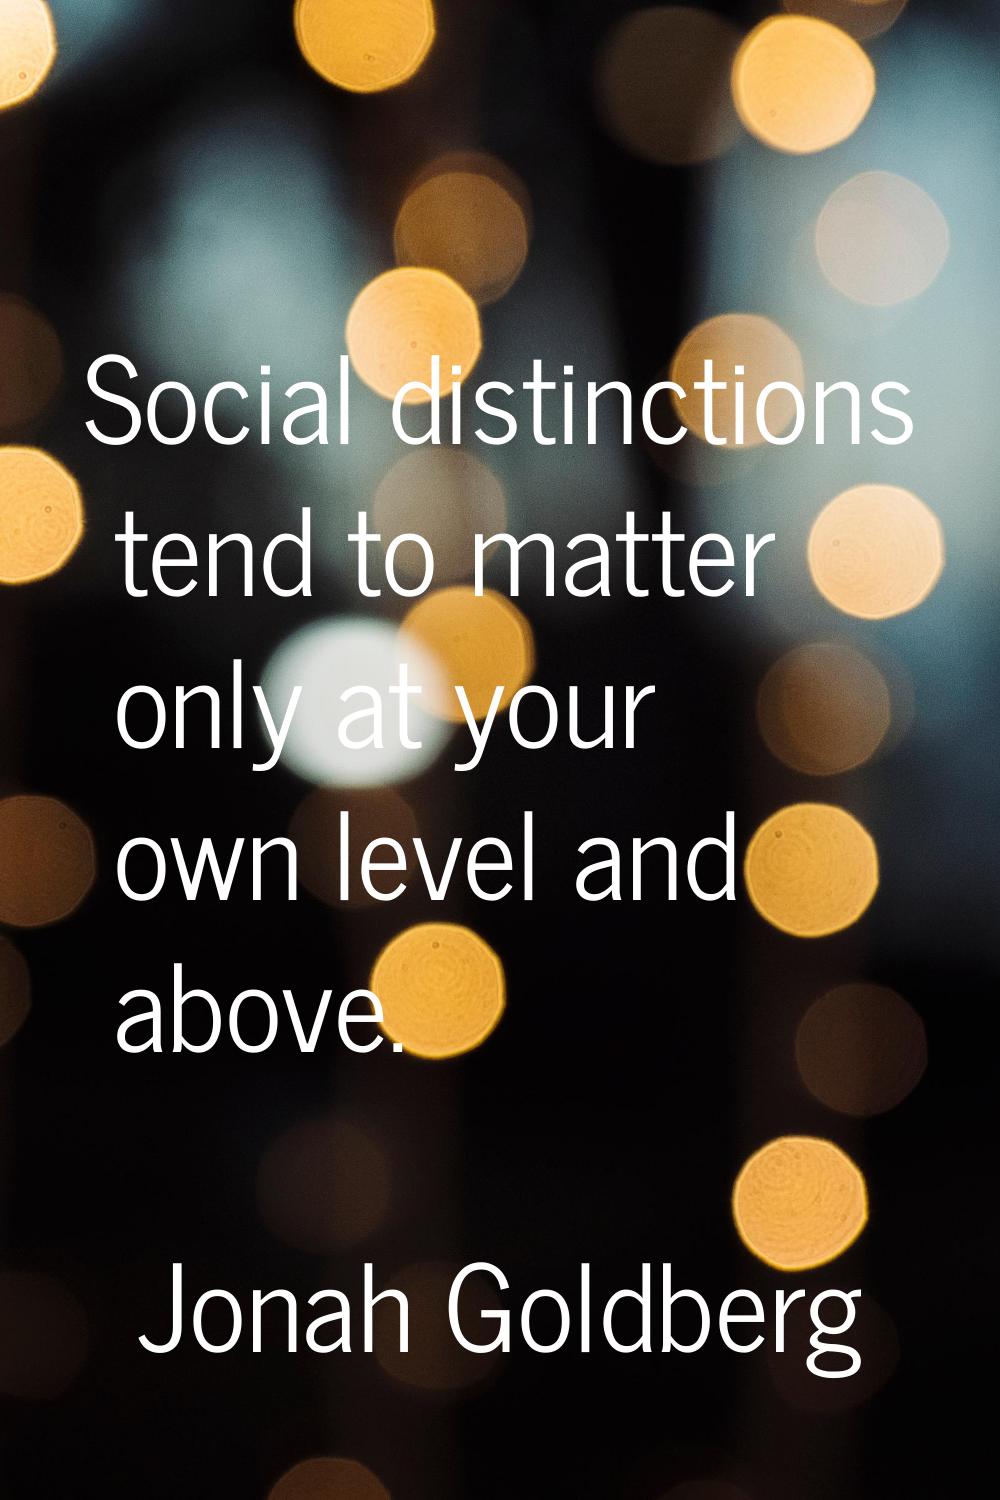 Social distinctions tend to matter only at your own level and above.